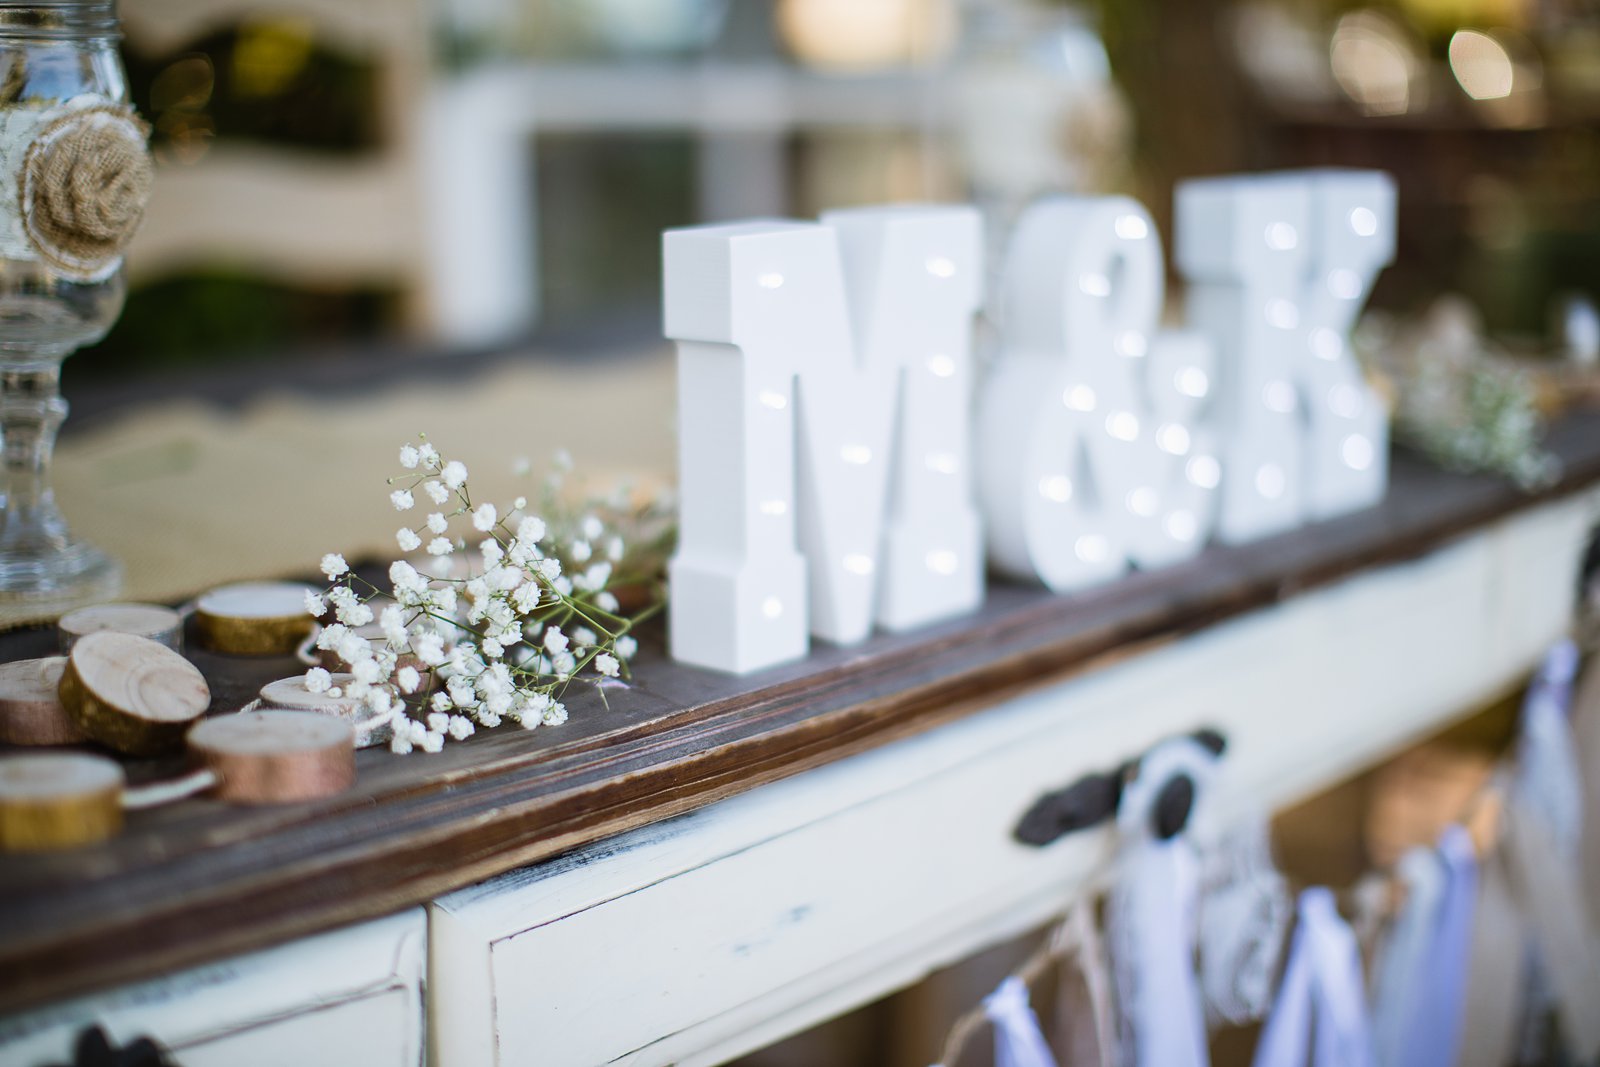 Image of rustic chic sweetheart table decorated with baby's breath and the couple's initials.